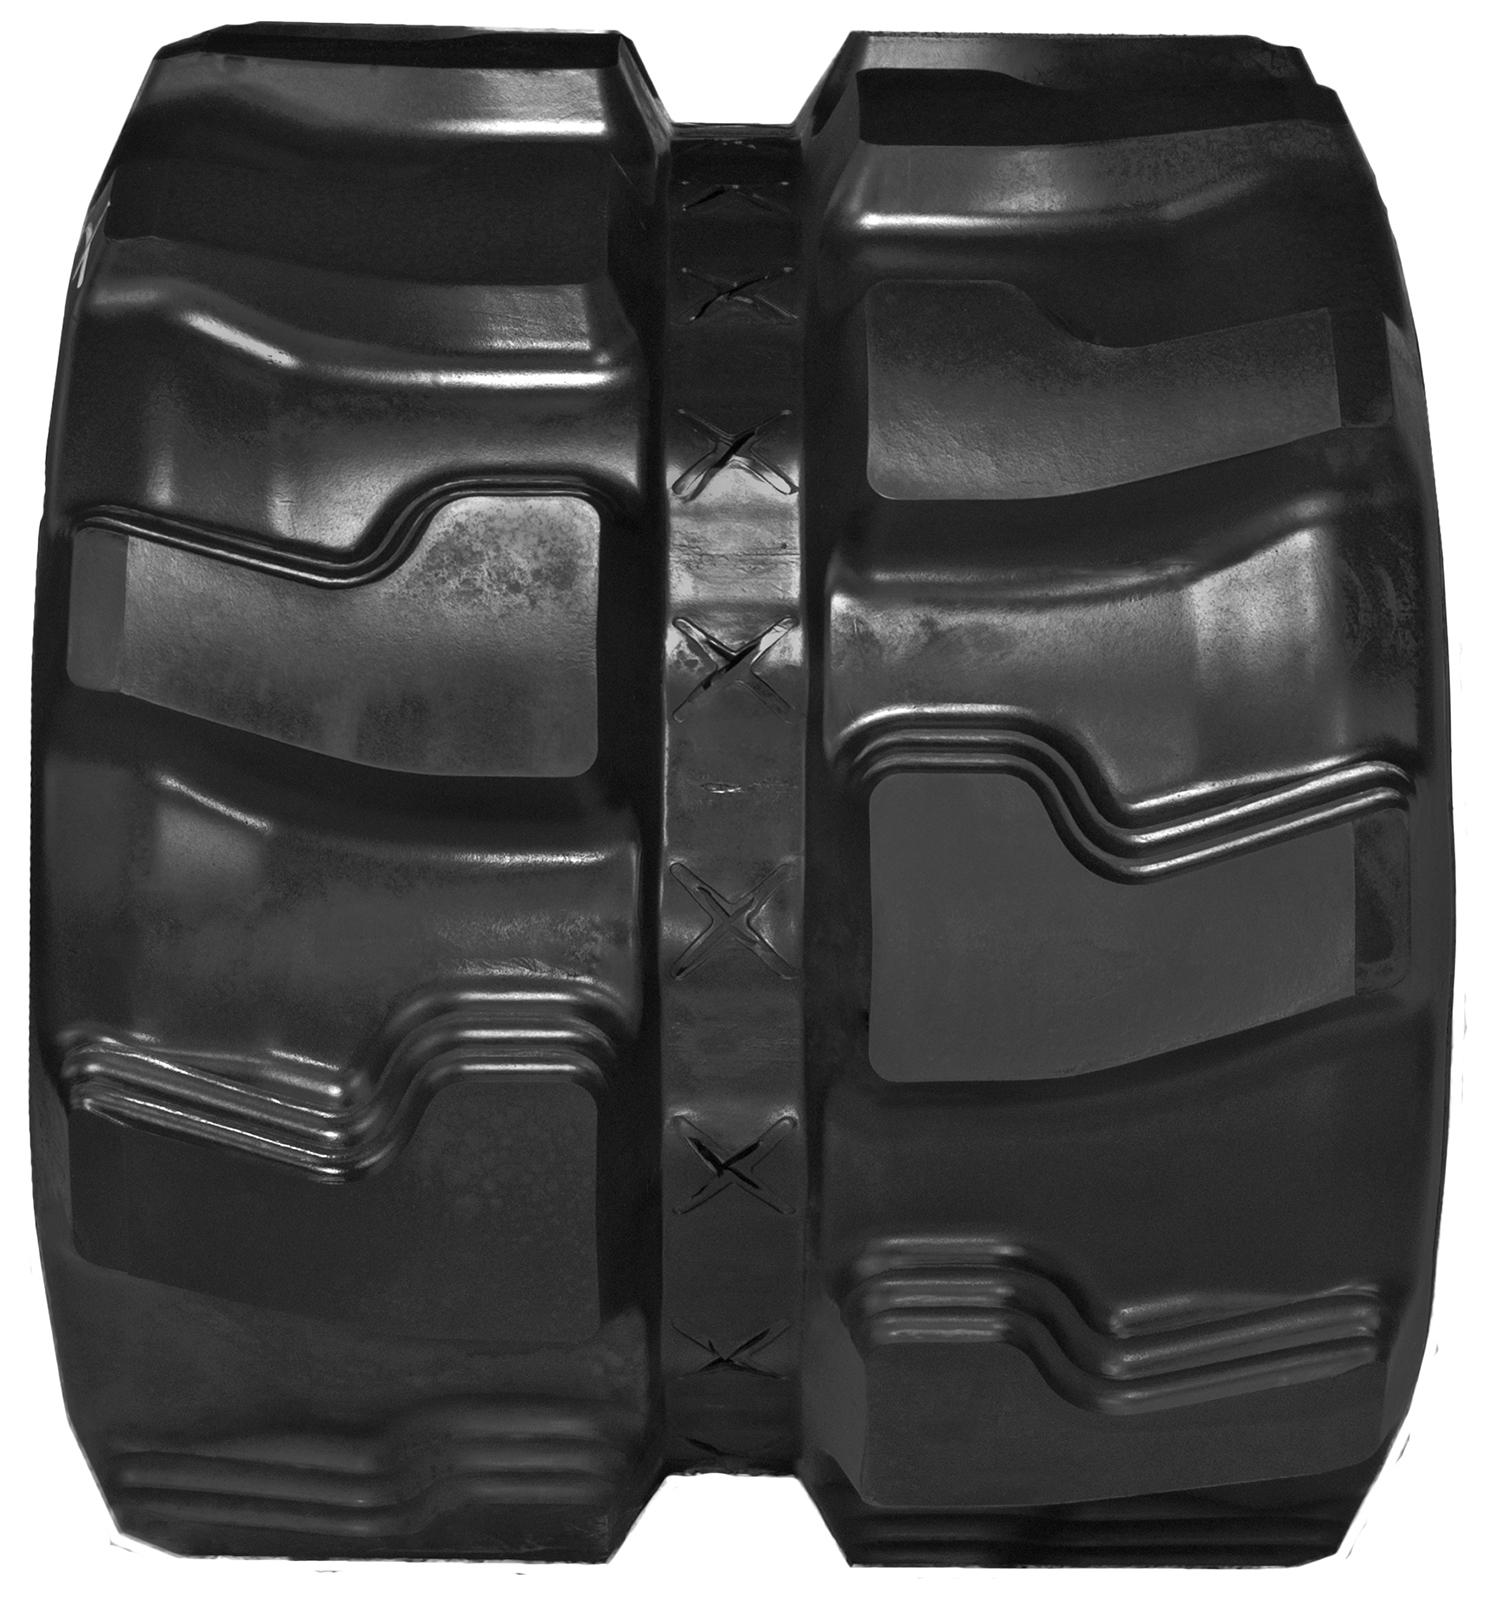 set of 2 18" camso heavy duty rubber track (450x81wx76)